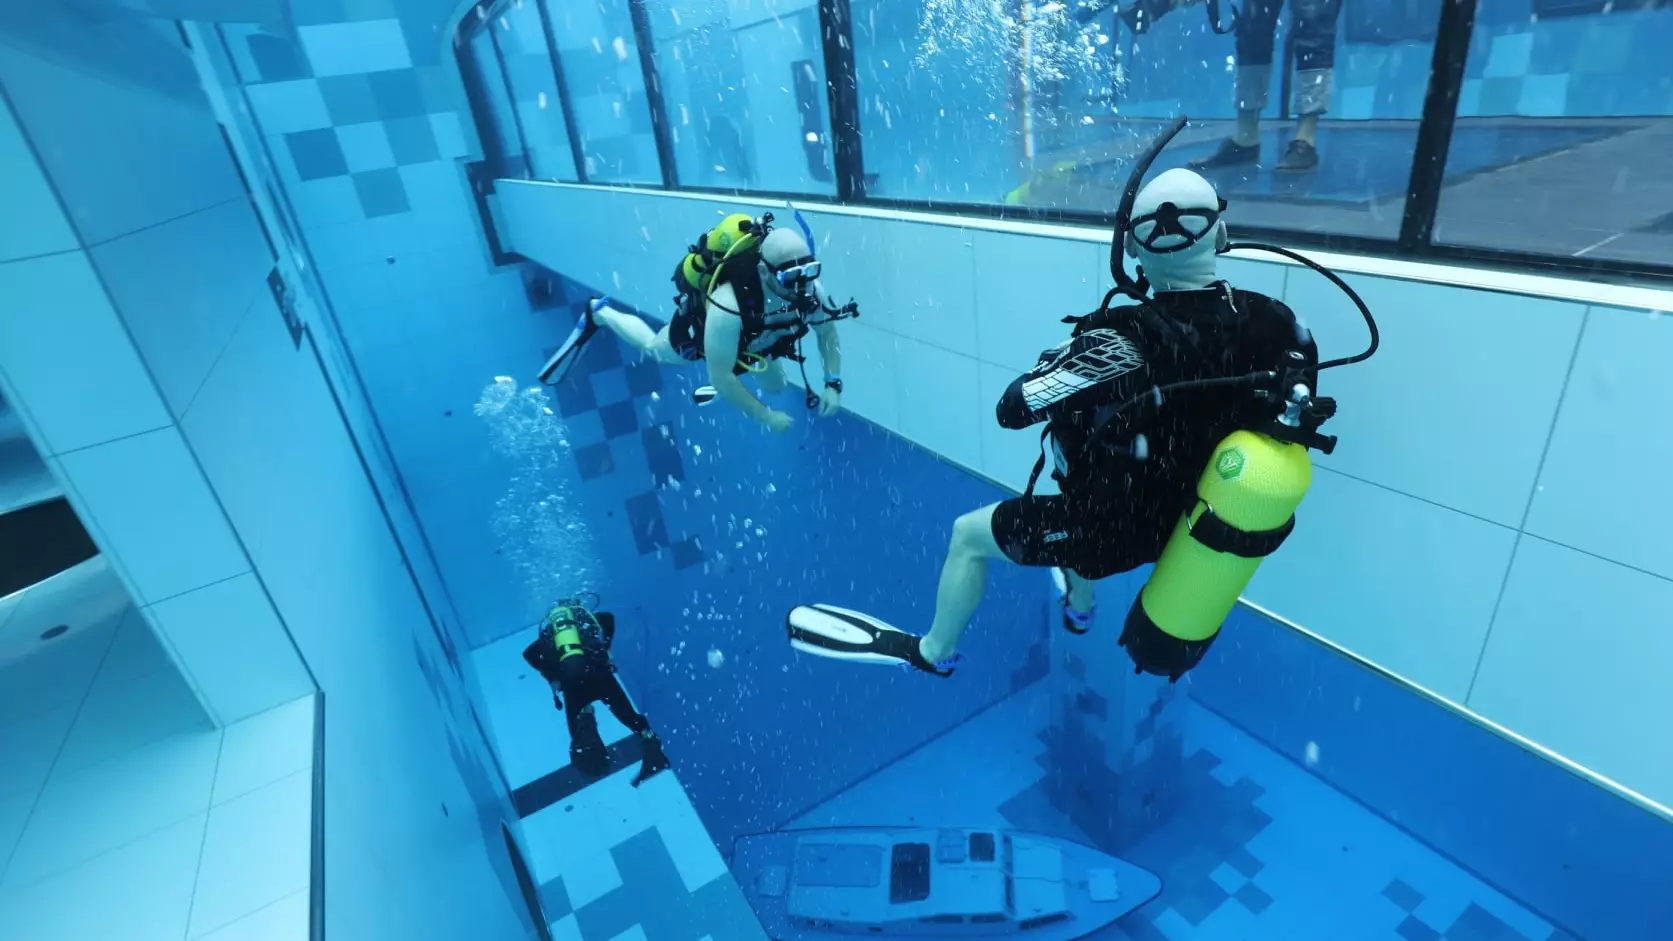 The World's Deepest Pool Has Been Opened In Poland